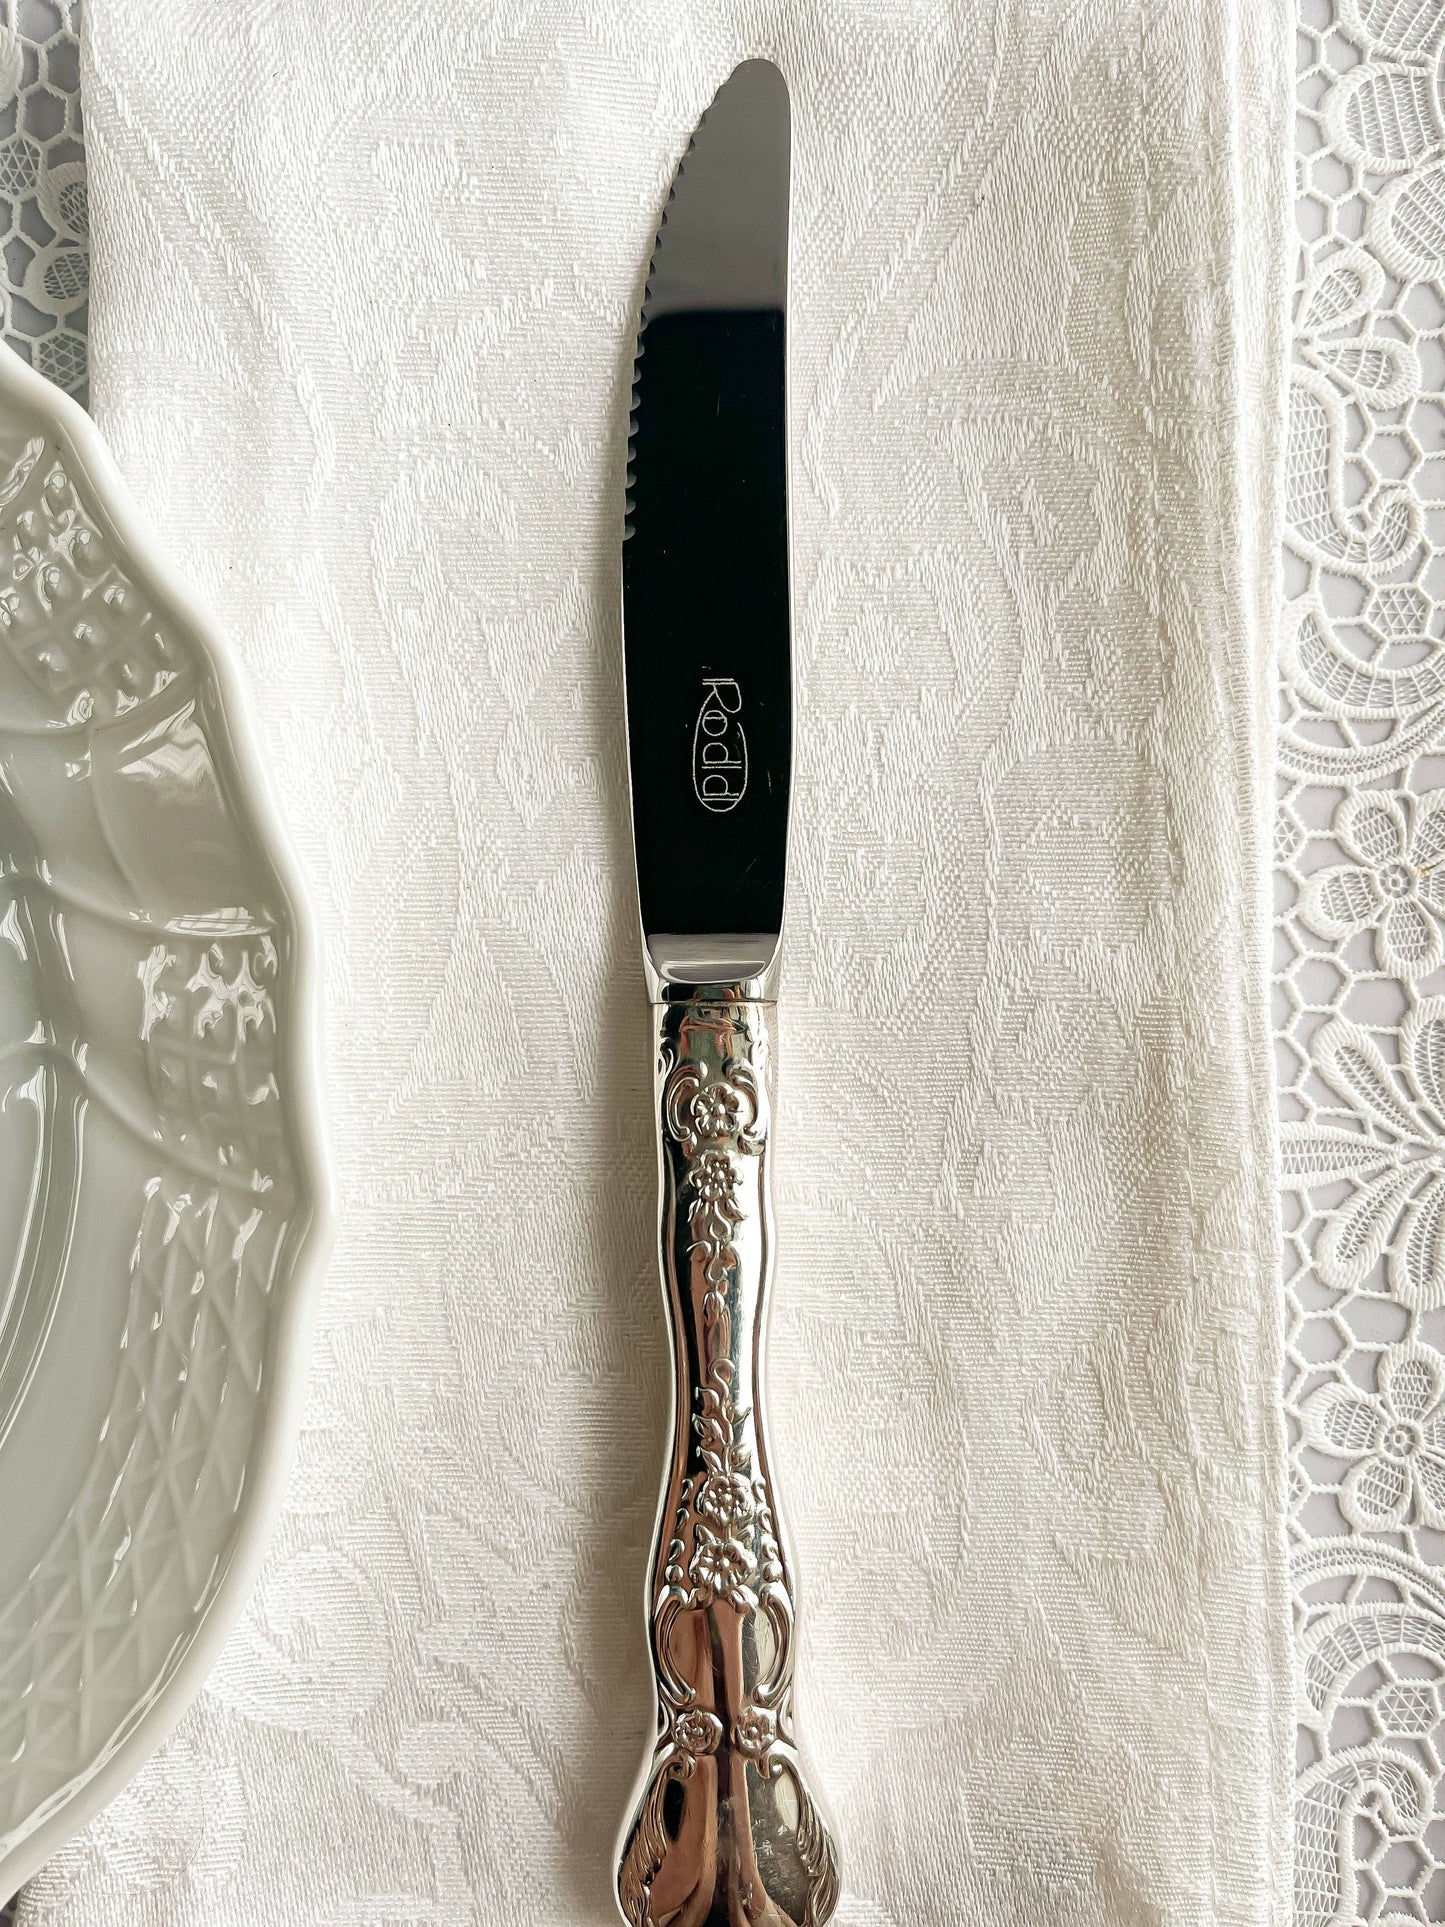 Rodd Set of 6 Luncheon Knives - 'Camille’ Pattern - SOSC Home